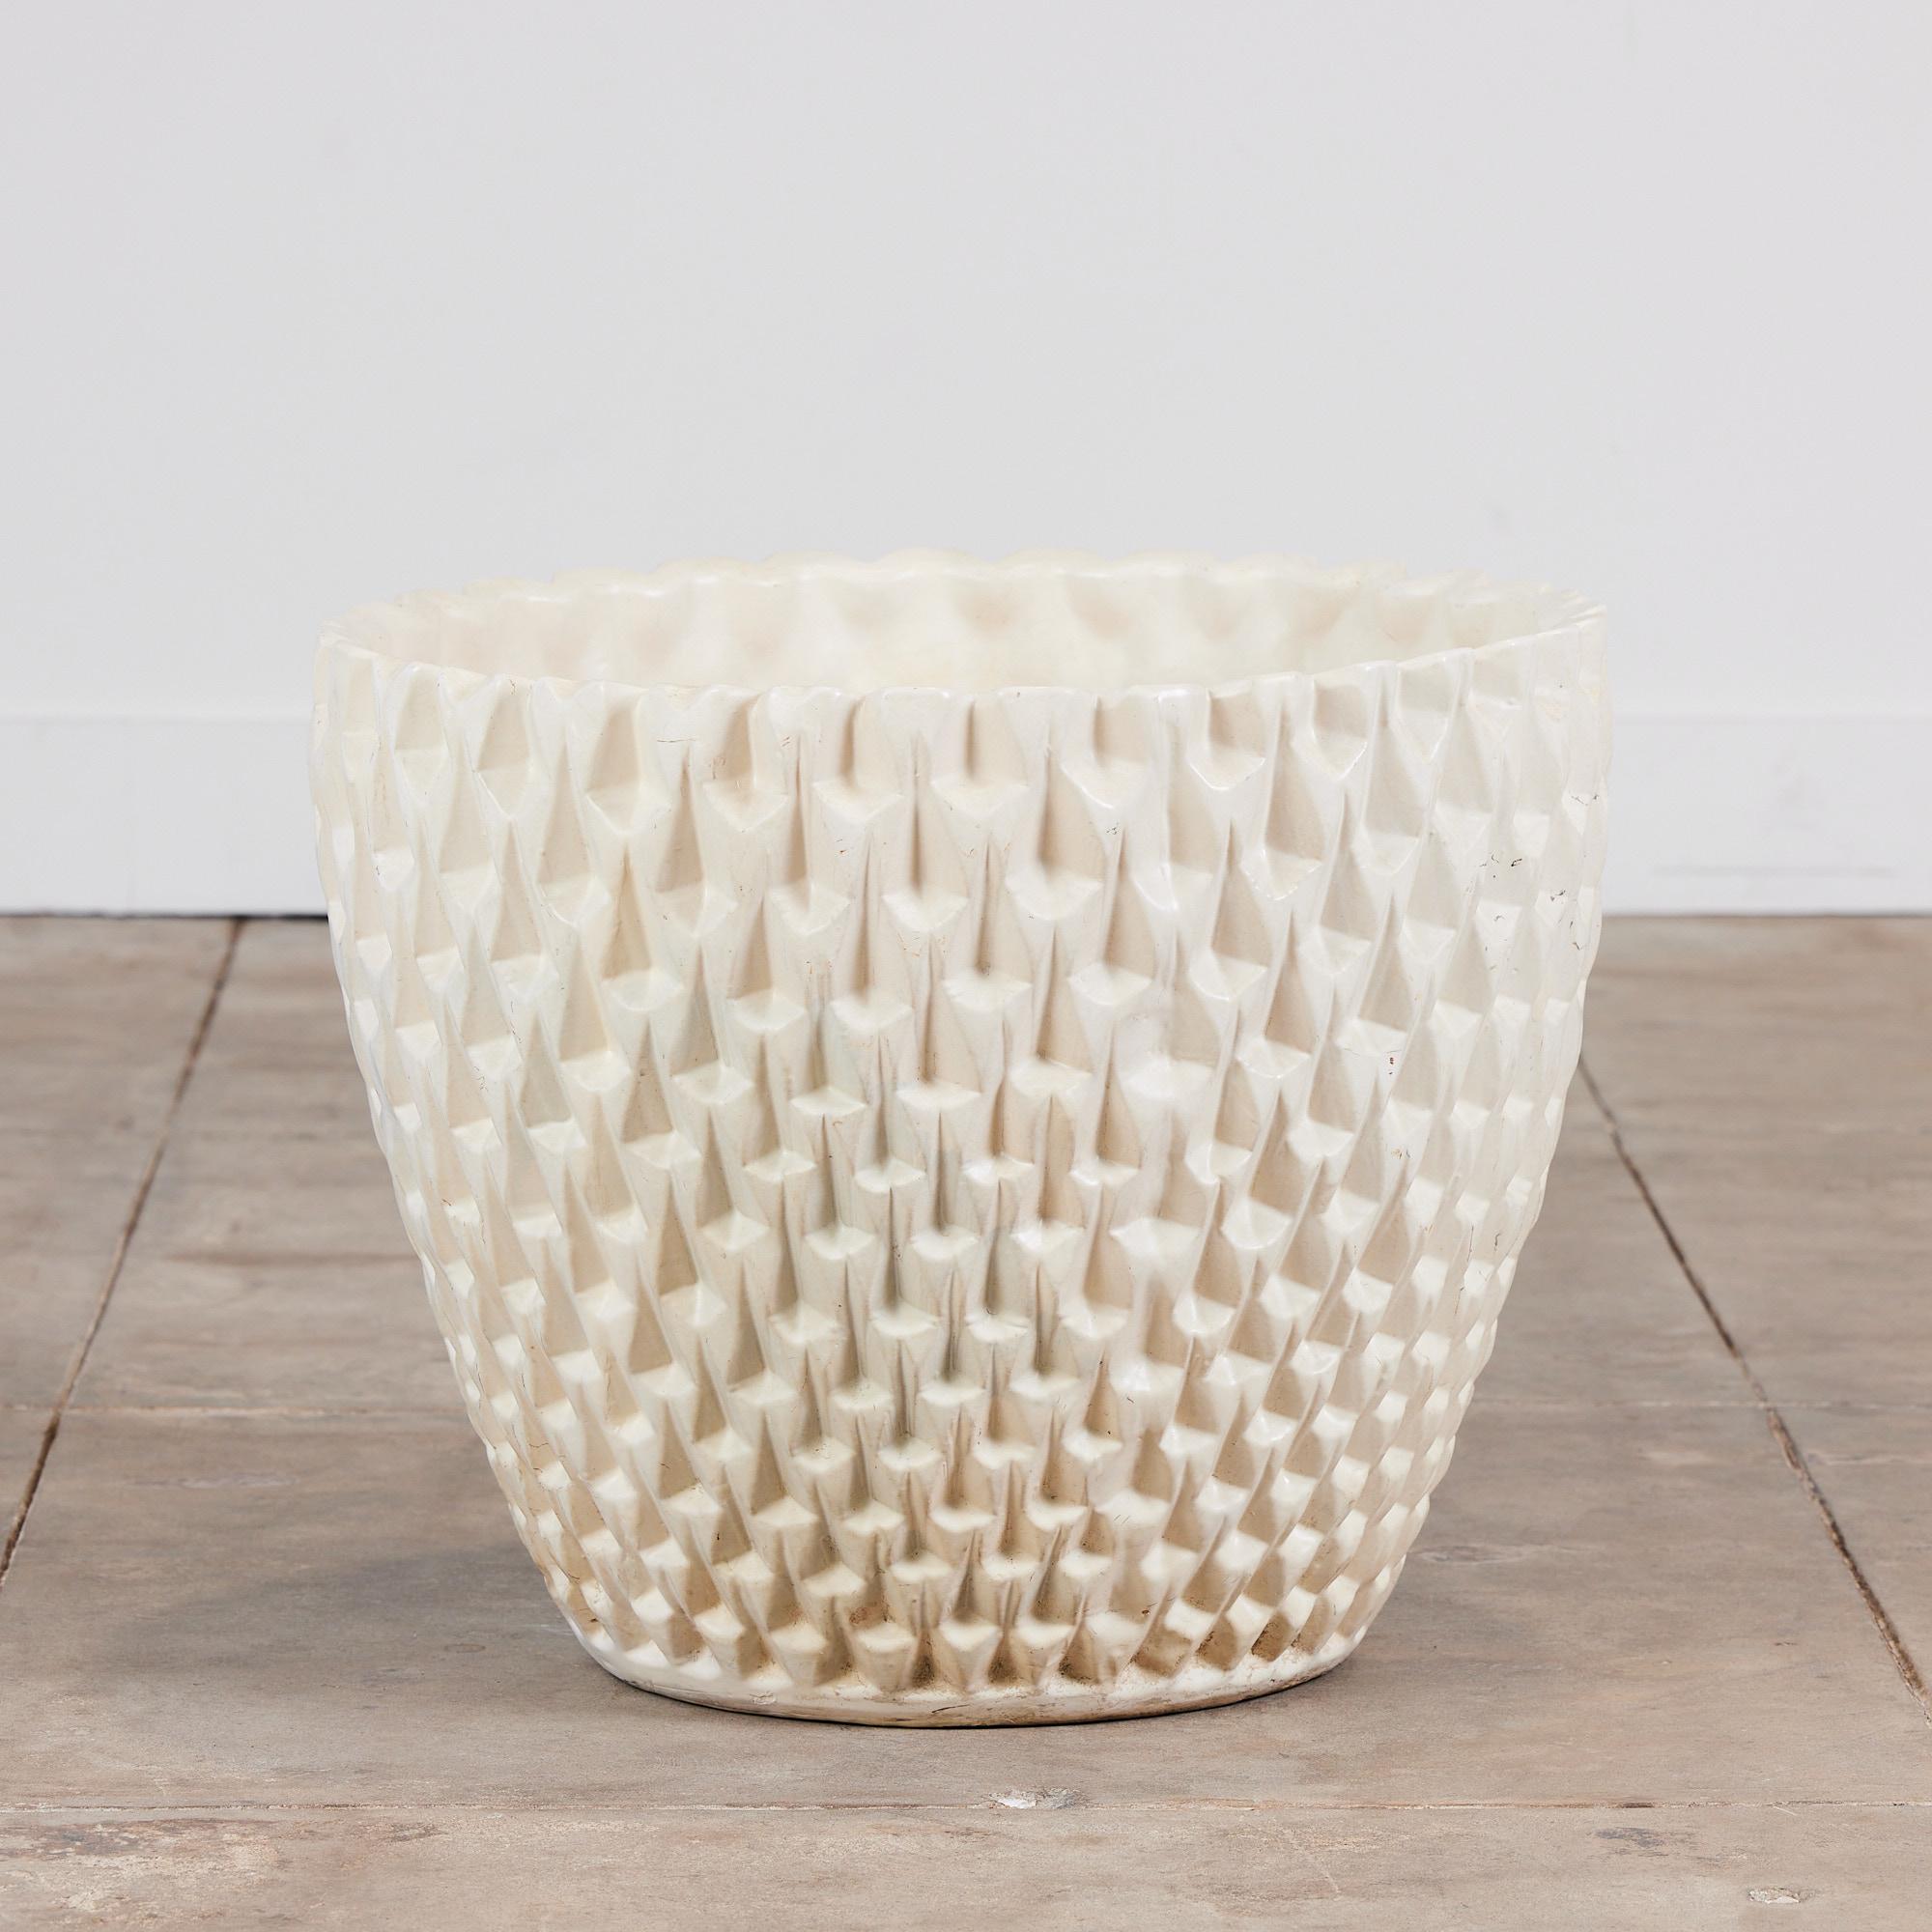 Designed by David Cressey in 1963 as part of the Pro/Artisan stoneware collection for Architectural Pottery, the slip cast Phoenix planter has a bowl shape with an allover geometric relief. This example has a creamy white glaze, emphasizing the